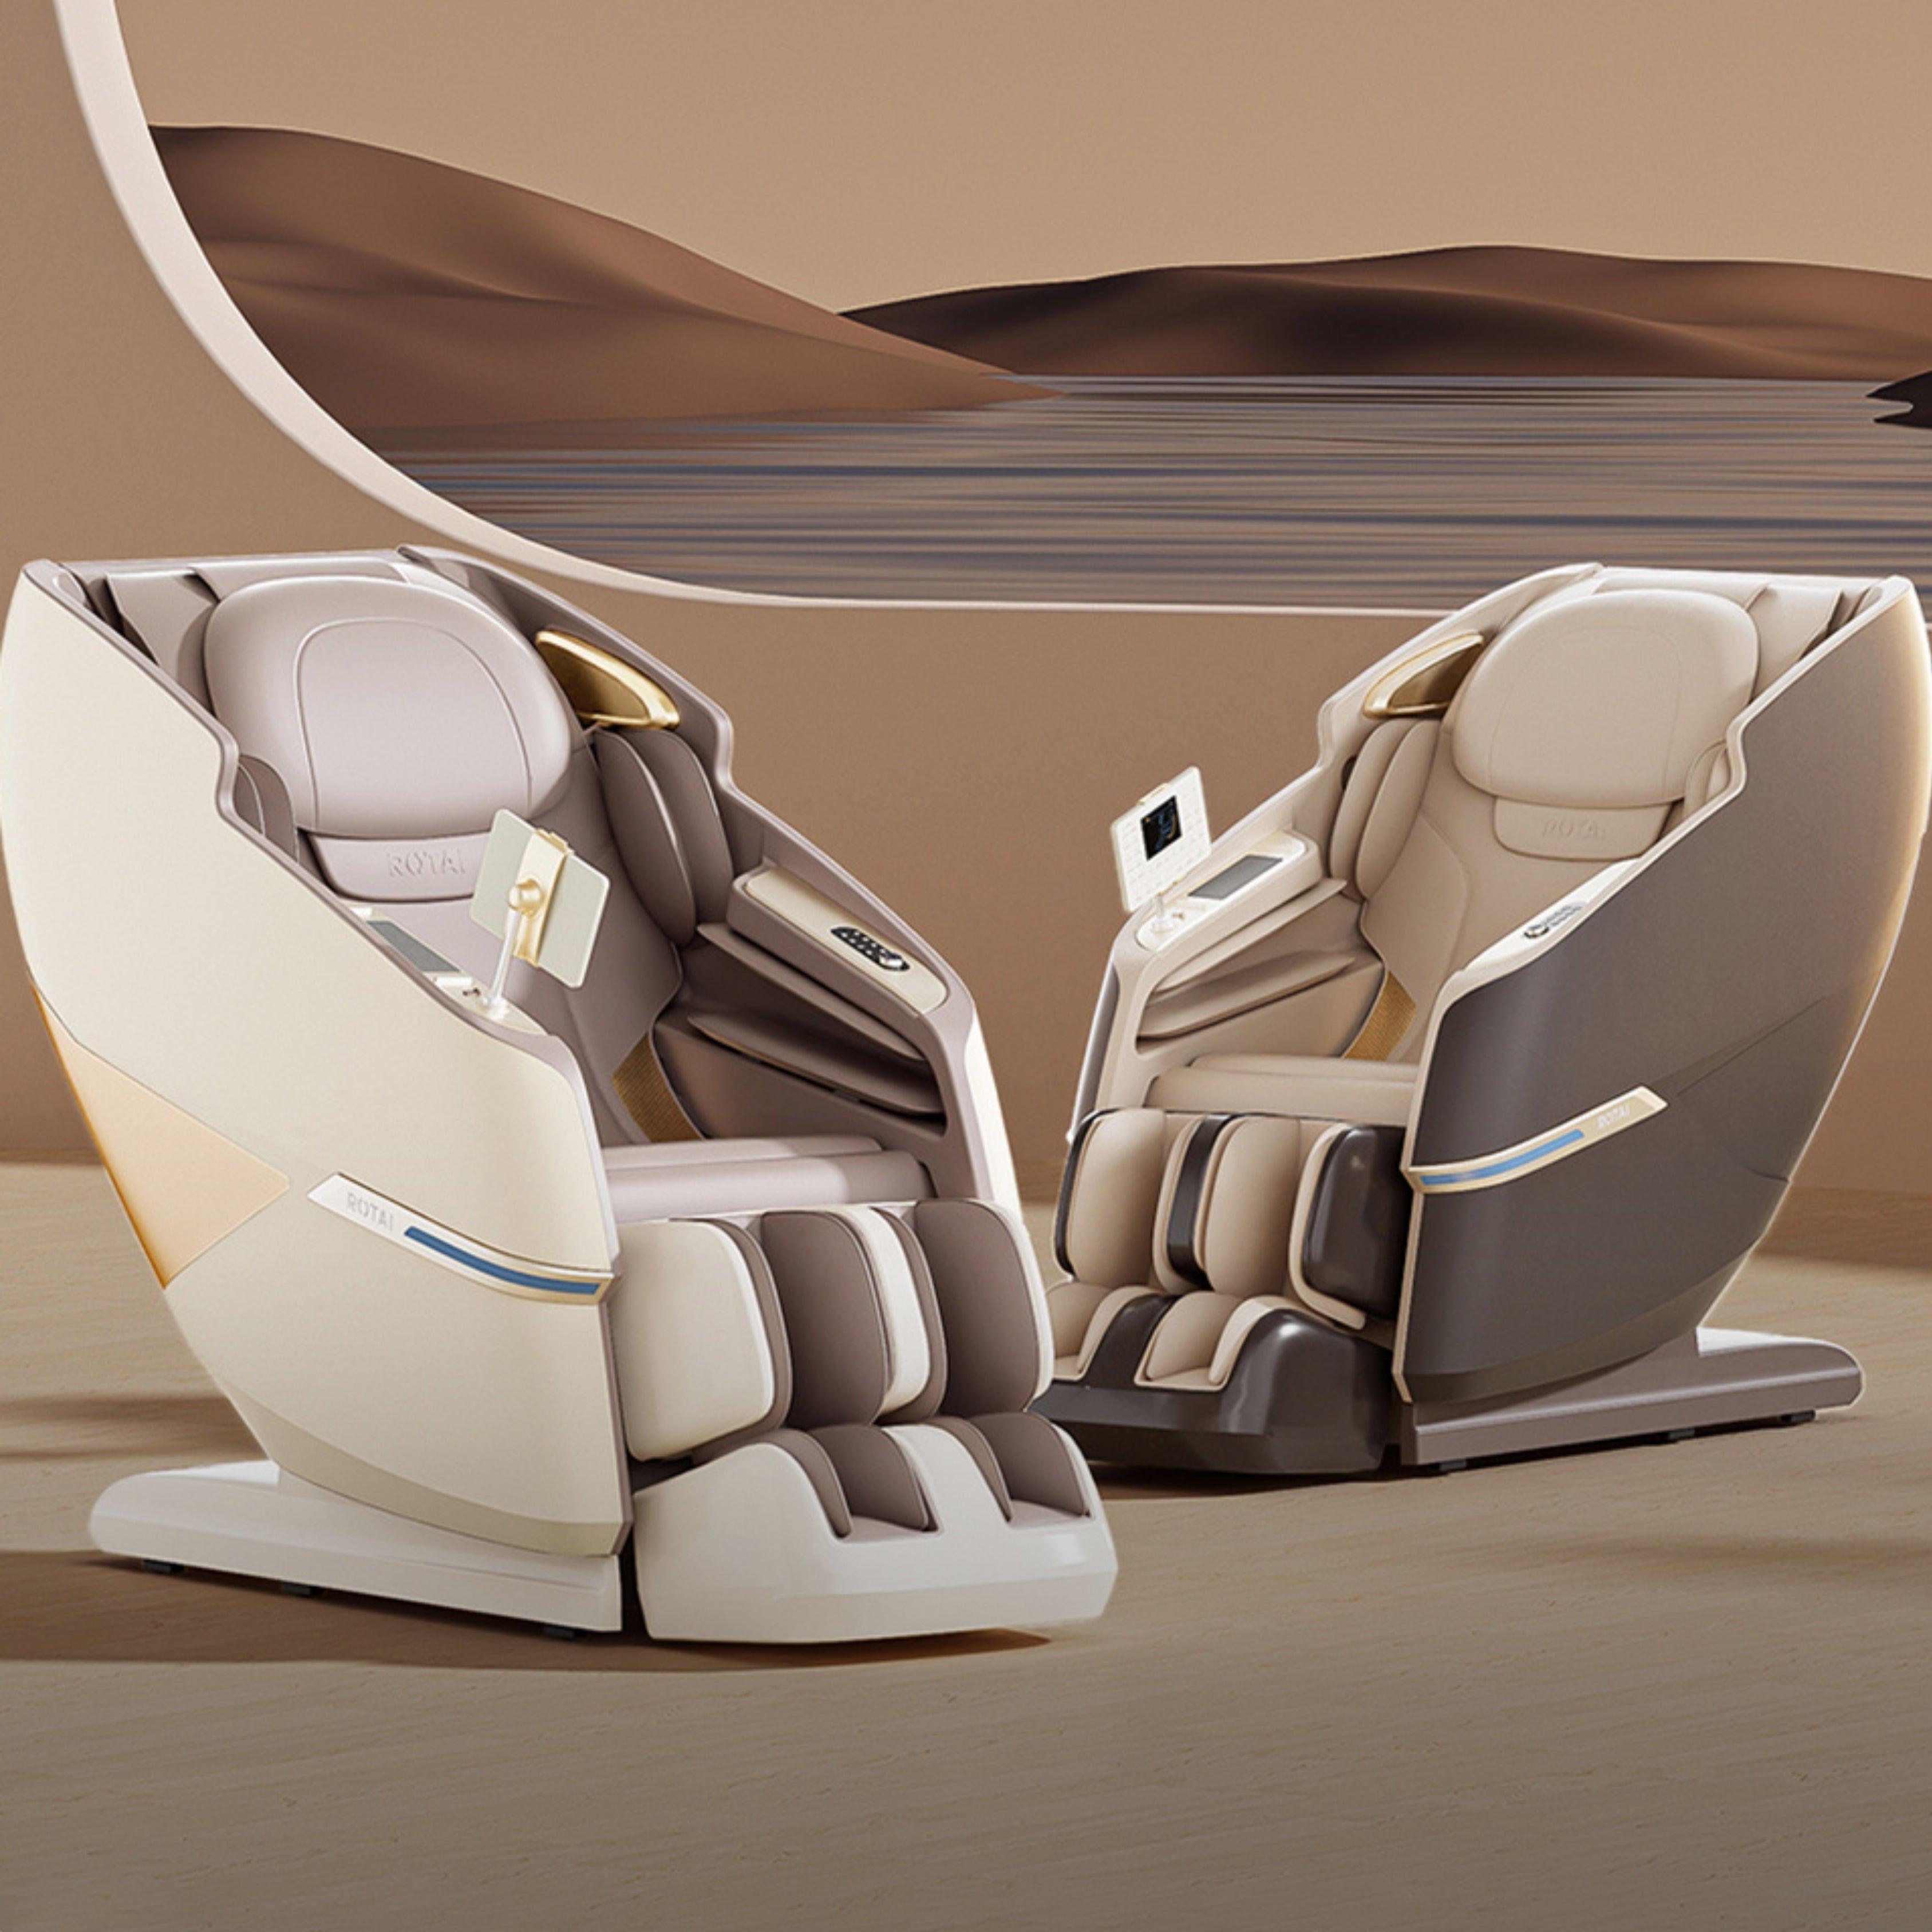 Best massage chair UAE - Royal Majestic Pro Massage Chair in brown with 3D movement and AI smart massage technology for ultimate relaxation.